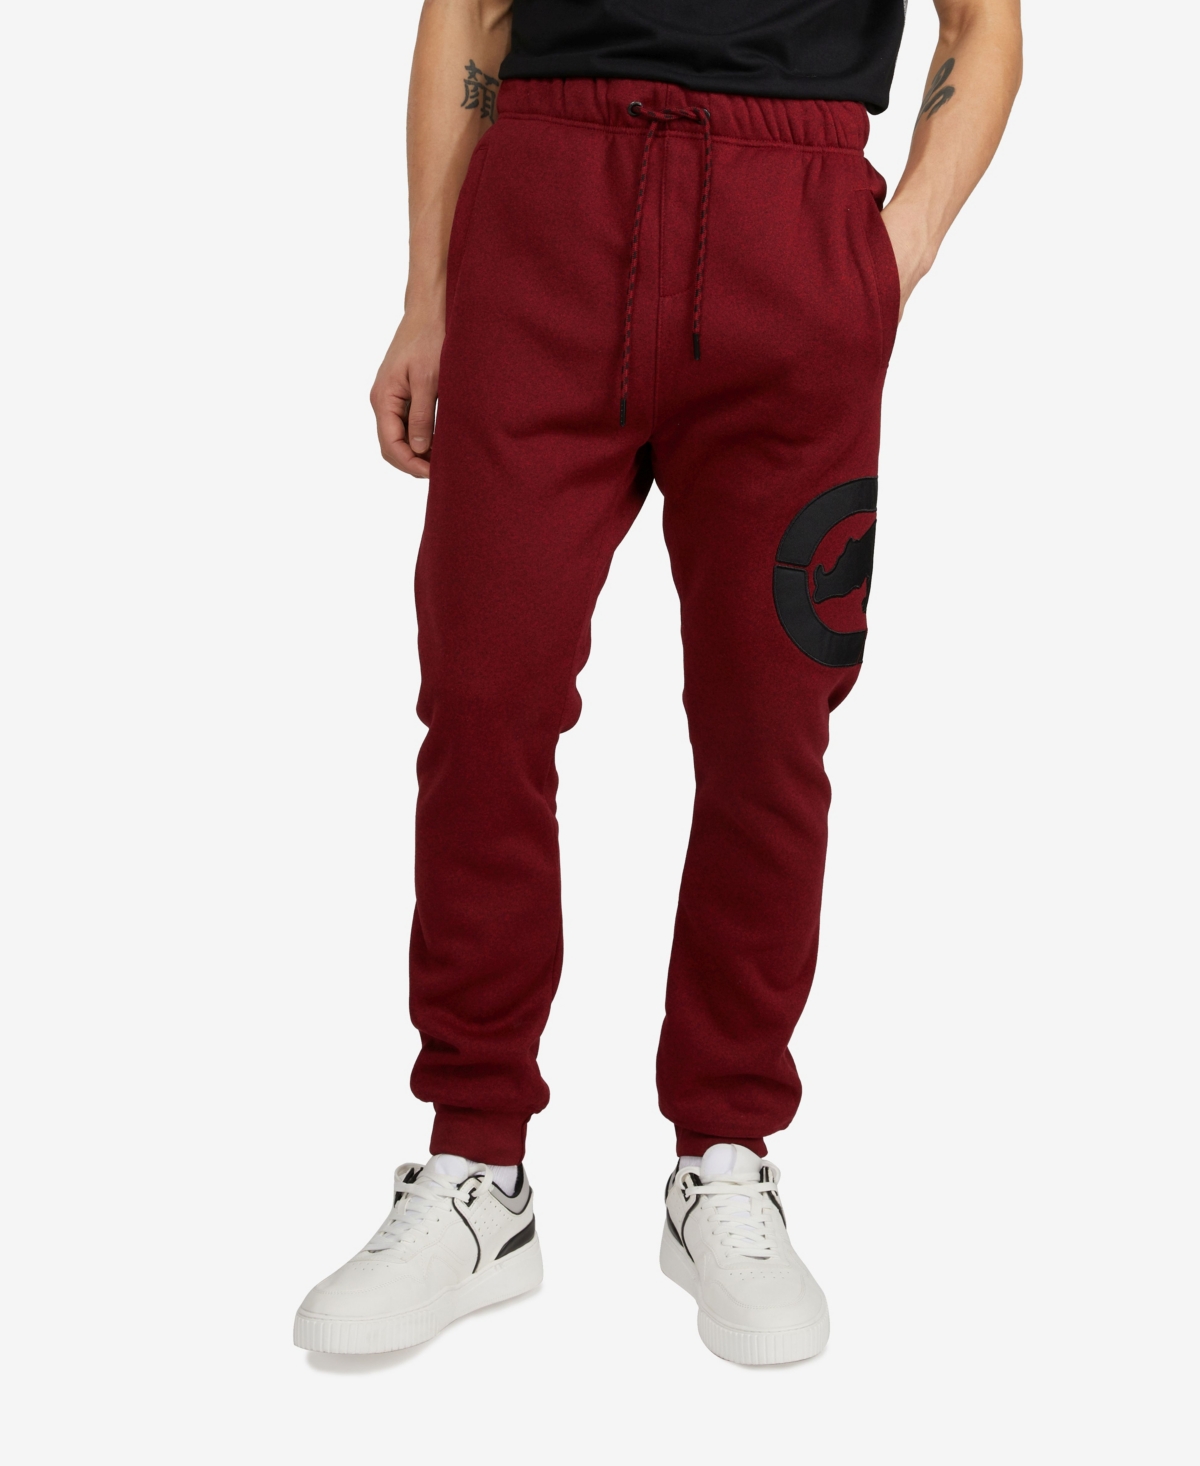 Men's Big and Tall Headfirst Joggers - Red